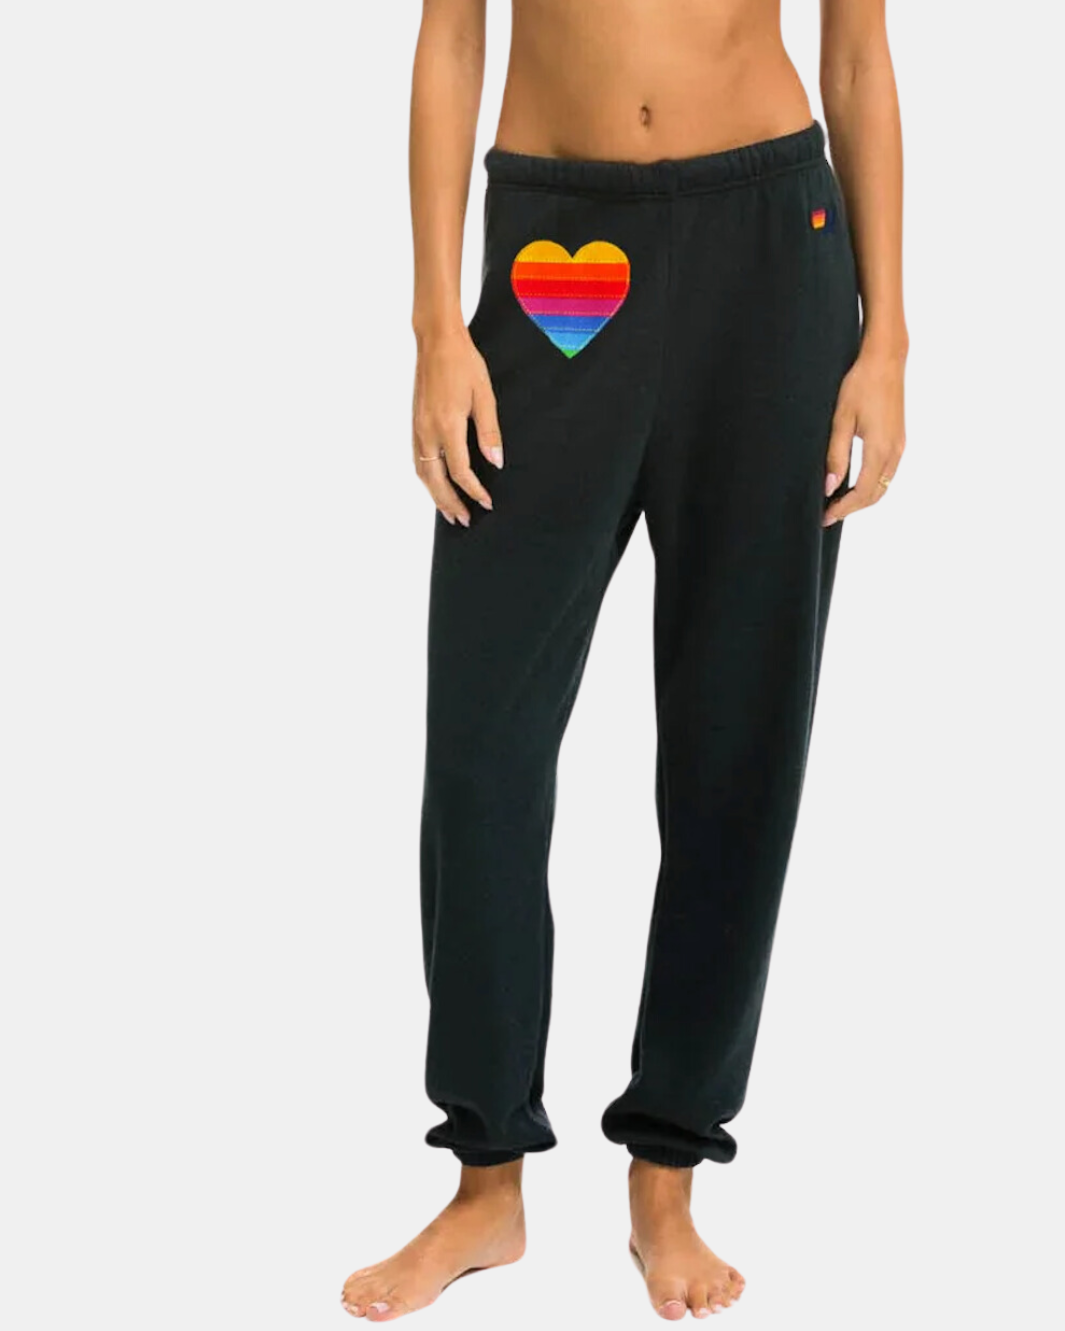 RAINBOW HEART STITCH SWEATPANTS IN CHARCOAL - Romi Boutique